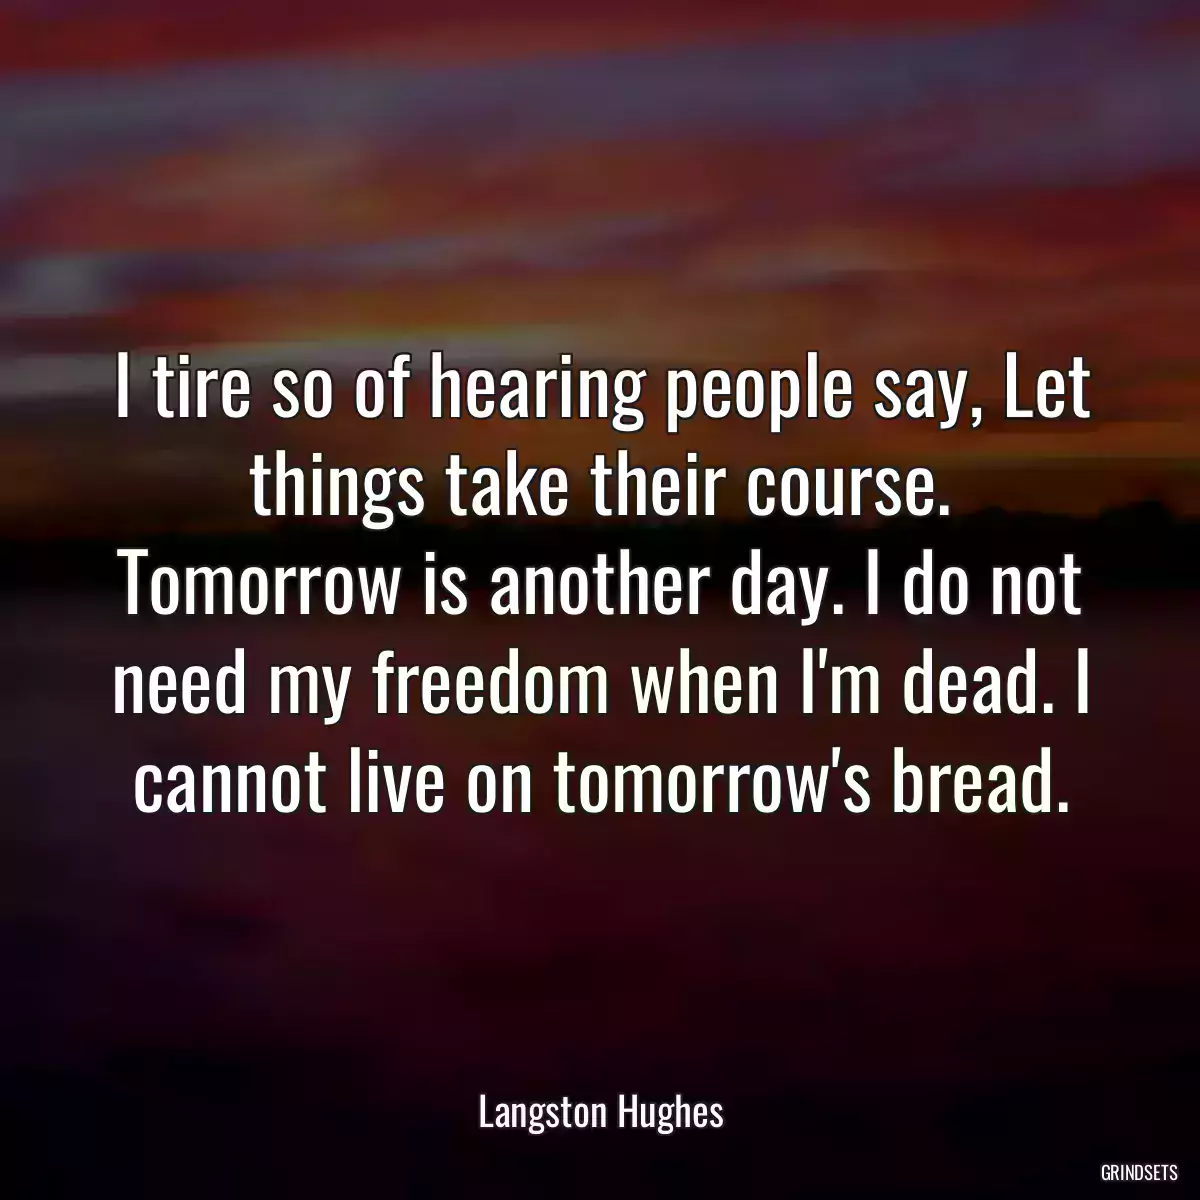 I tire so of hearing people say, Let things take their course. Tomorrow is another day. I do not need my freedom when I\'m dead. I cannot live on tomorrow\'s bread.